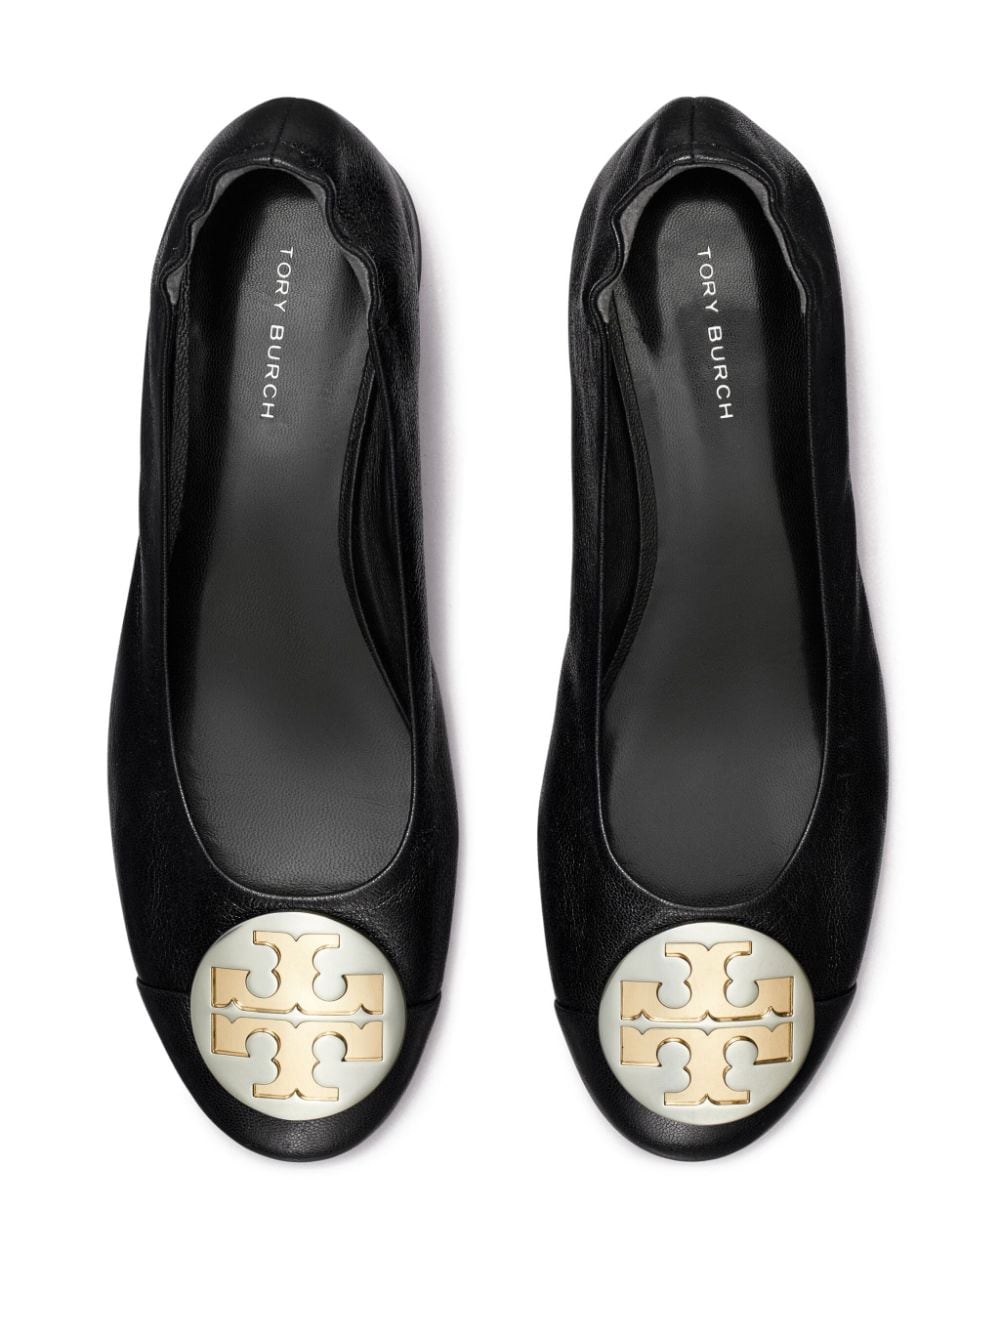 Tory Burch Claire 25mm leather Ballerina shoes Black